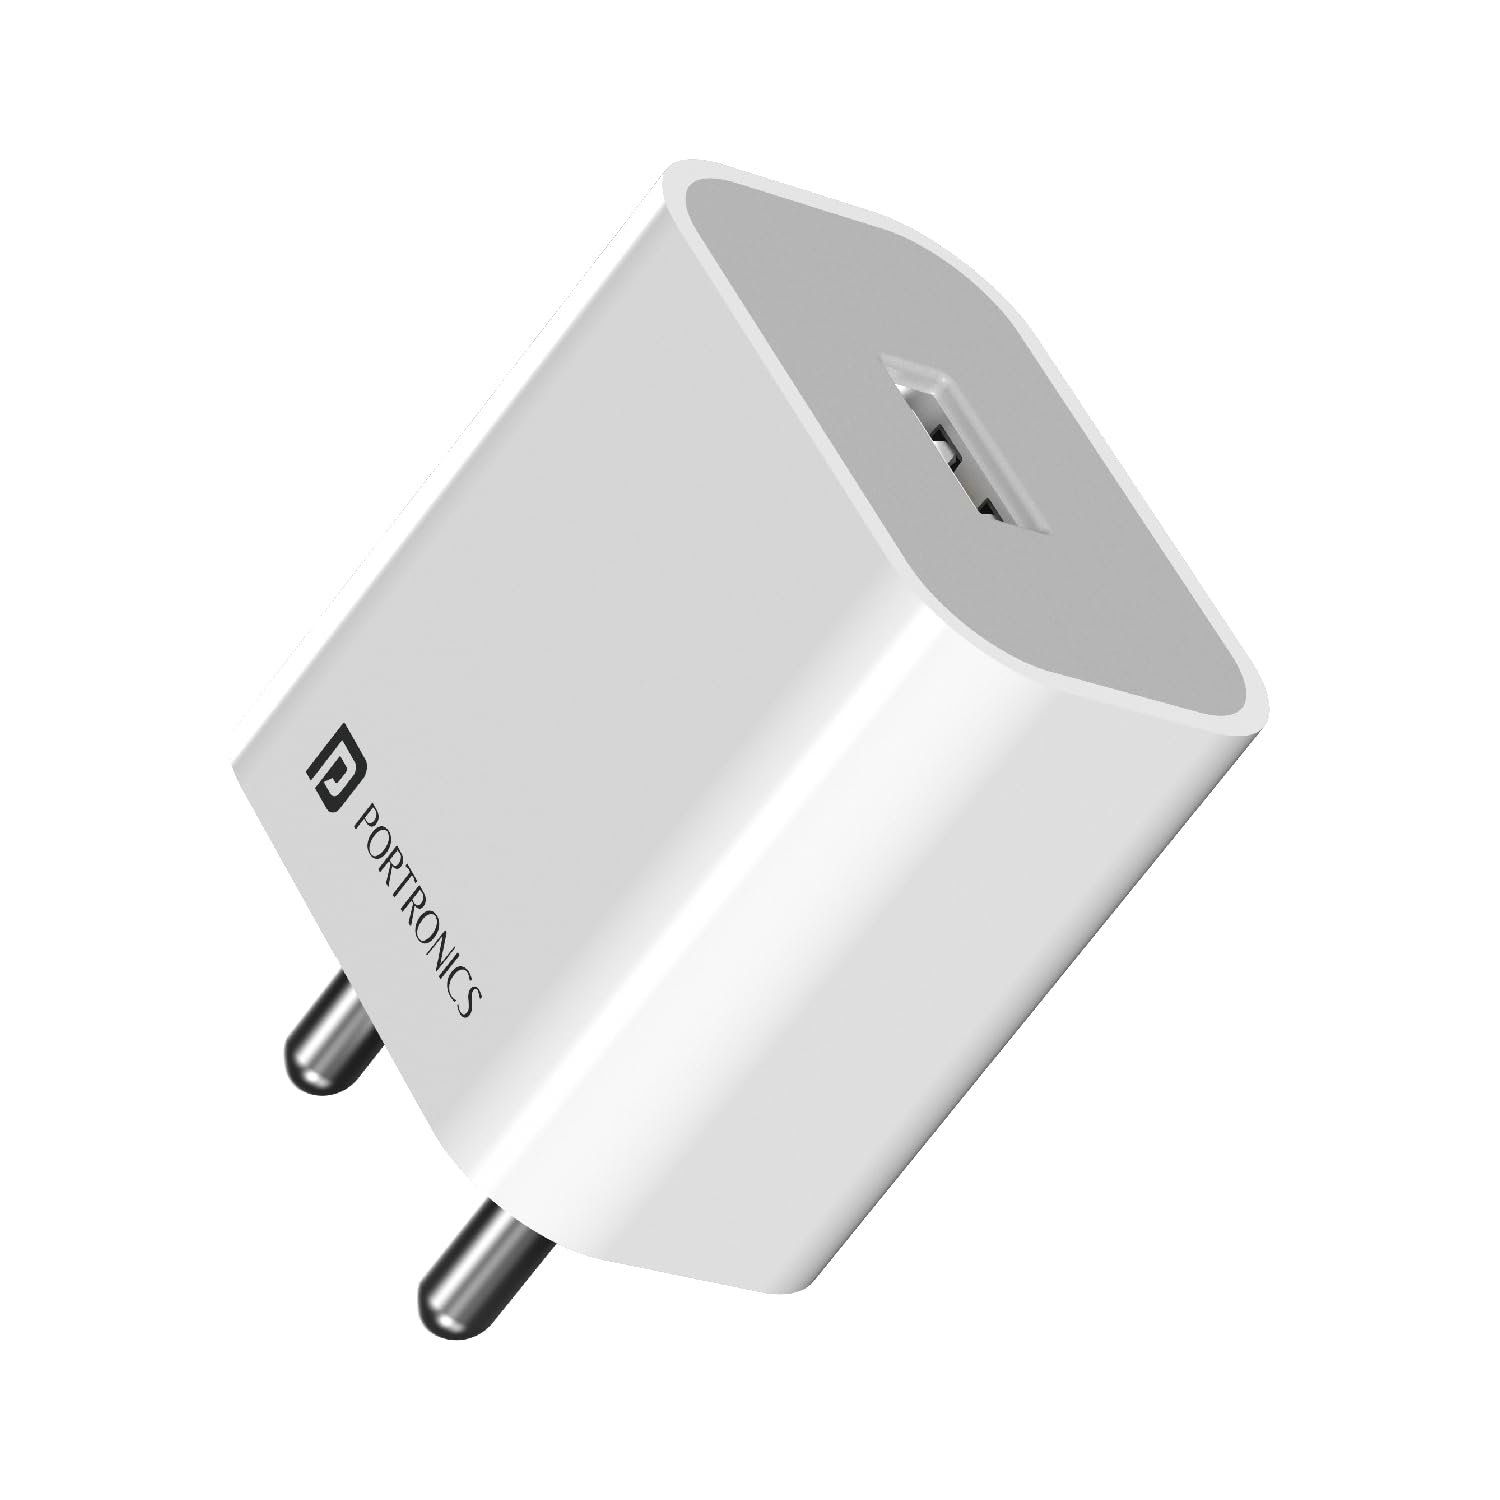 Portronics(POR 1962)Adapto 12 2.4A 12W Fast Wall Charger for iPhone 11/Xs/XS Max/XR/X/8/7/6/Plus, iP